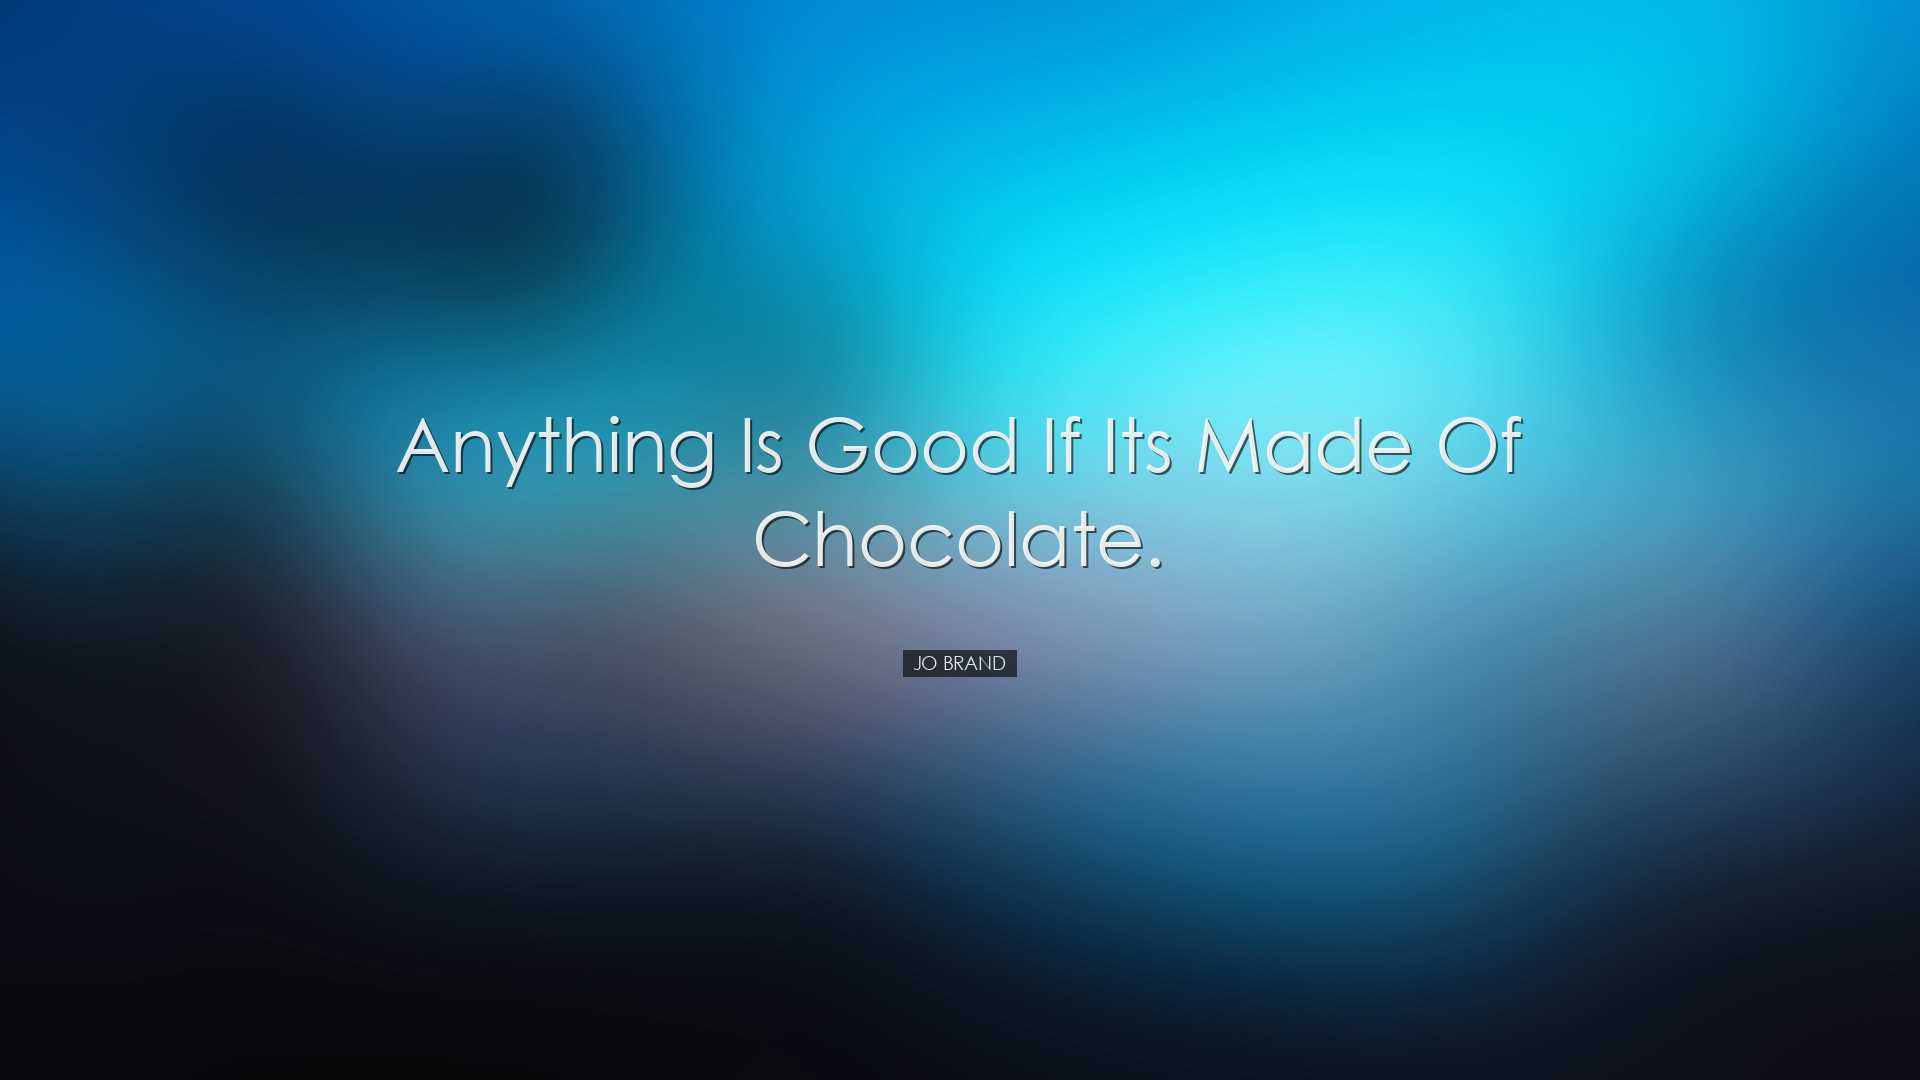 Anything is good if its made of chocolate. - Jo Brand